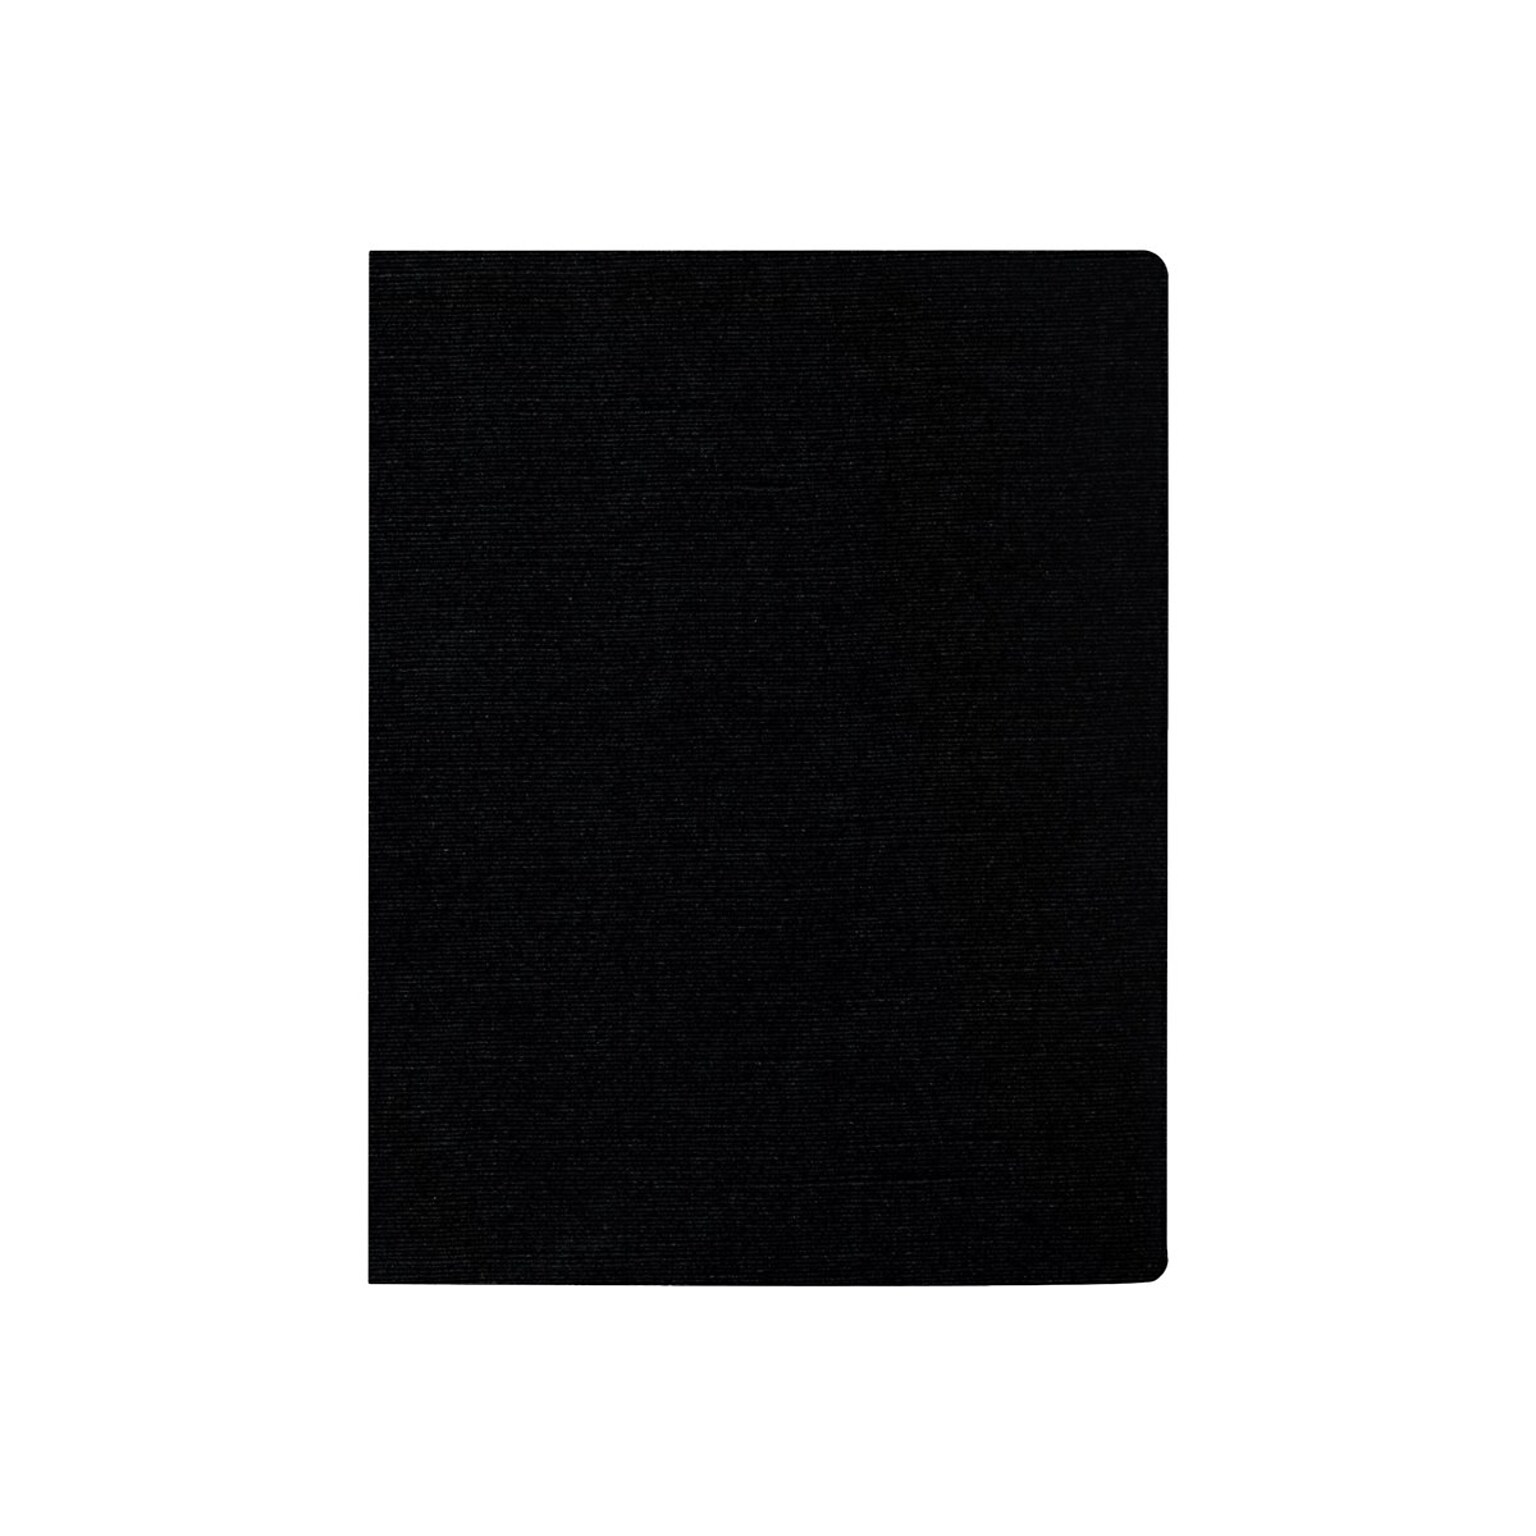 Fellowes Expressions Presentation Covers, Oversize, Black, 200/Pack (52115)